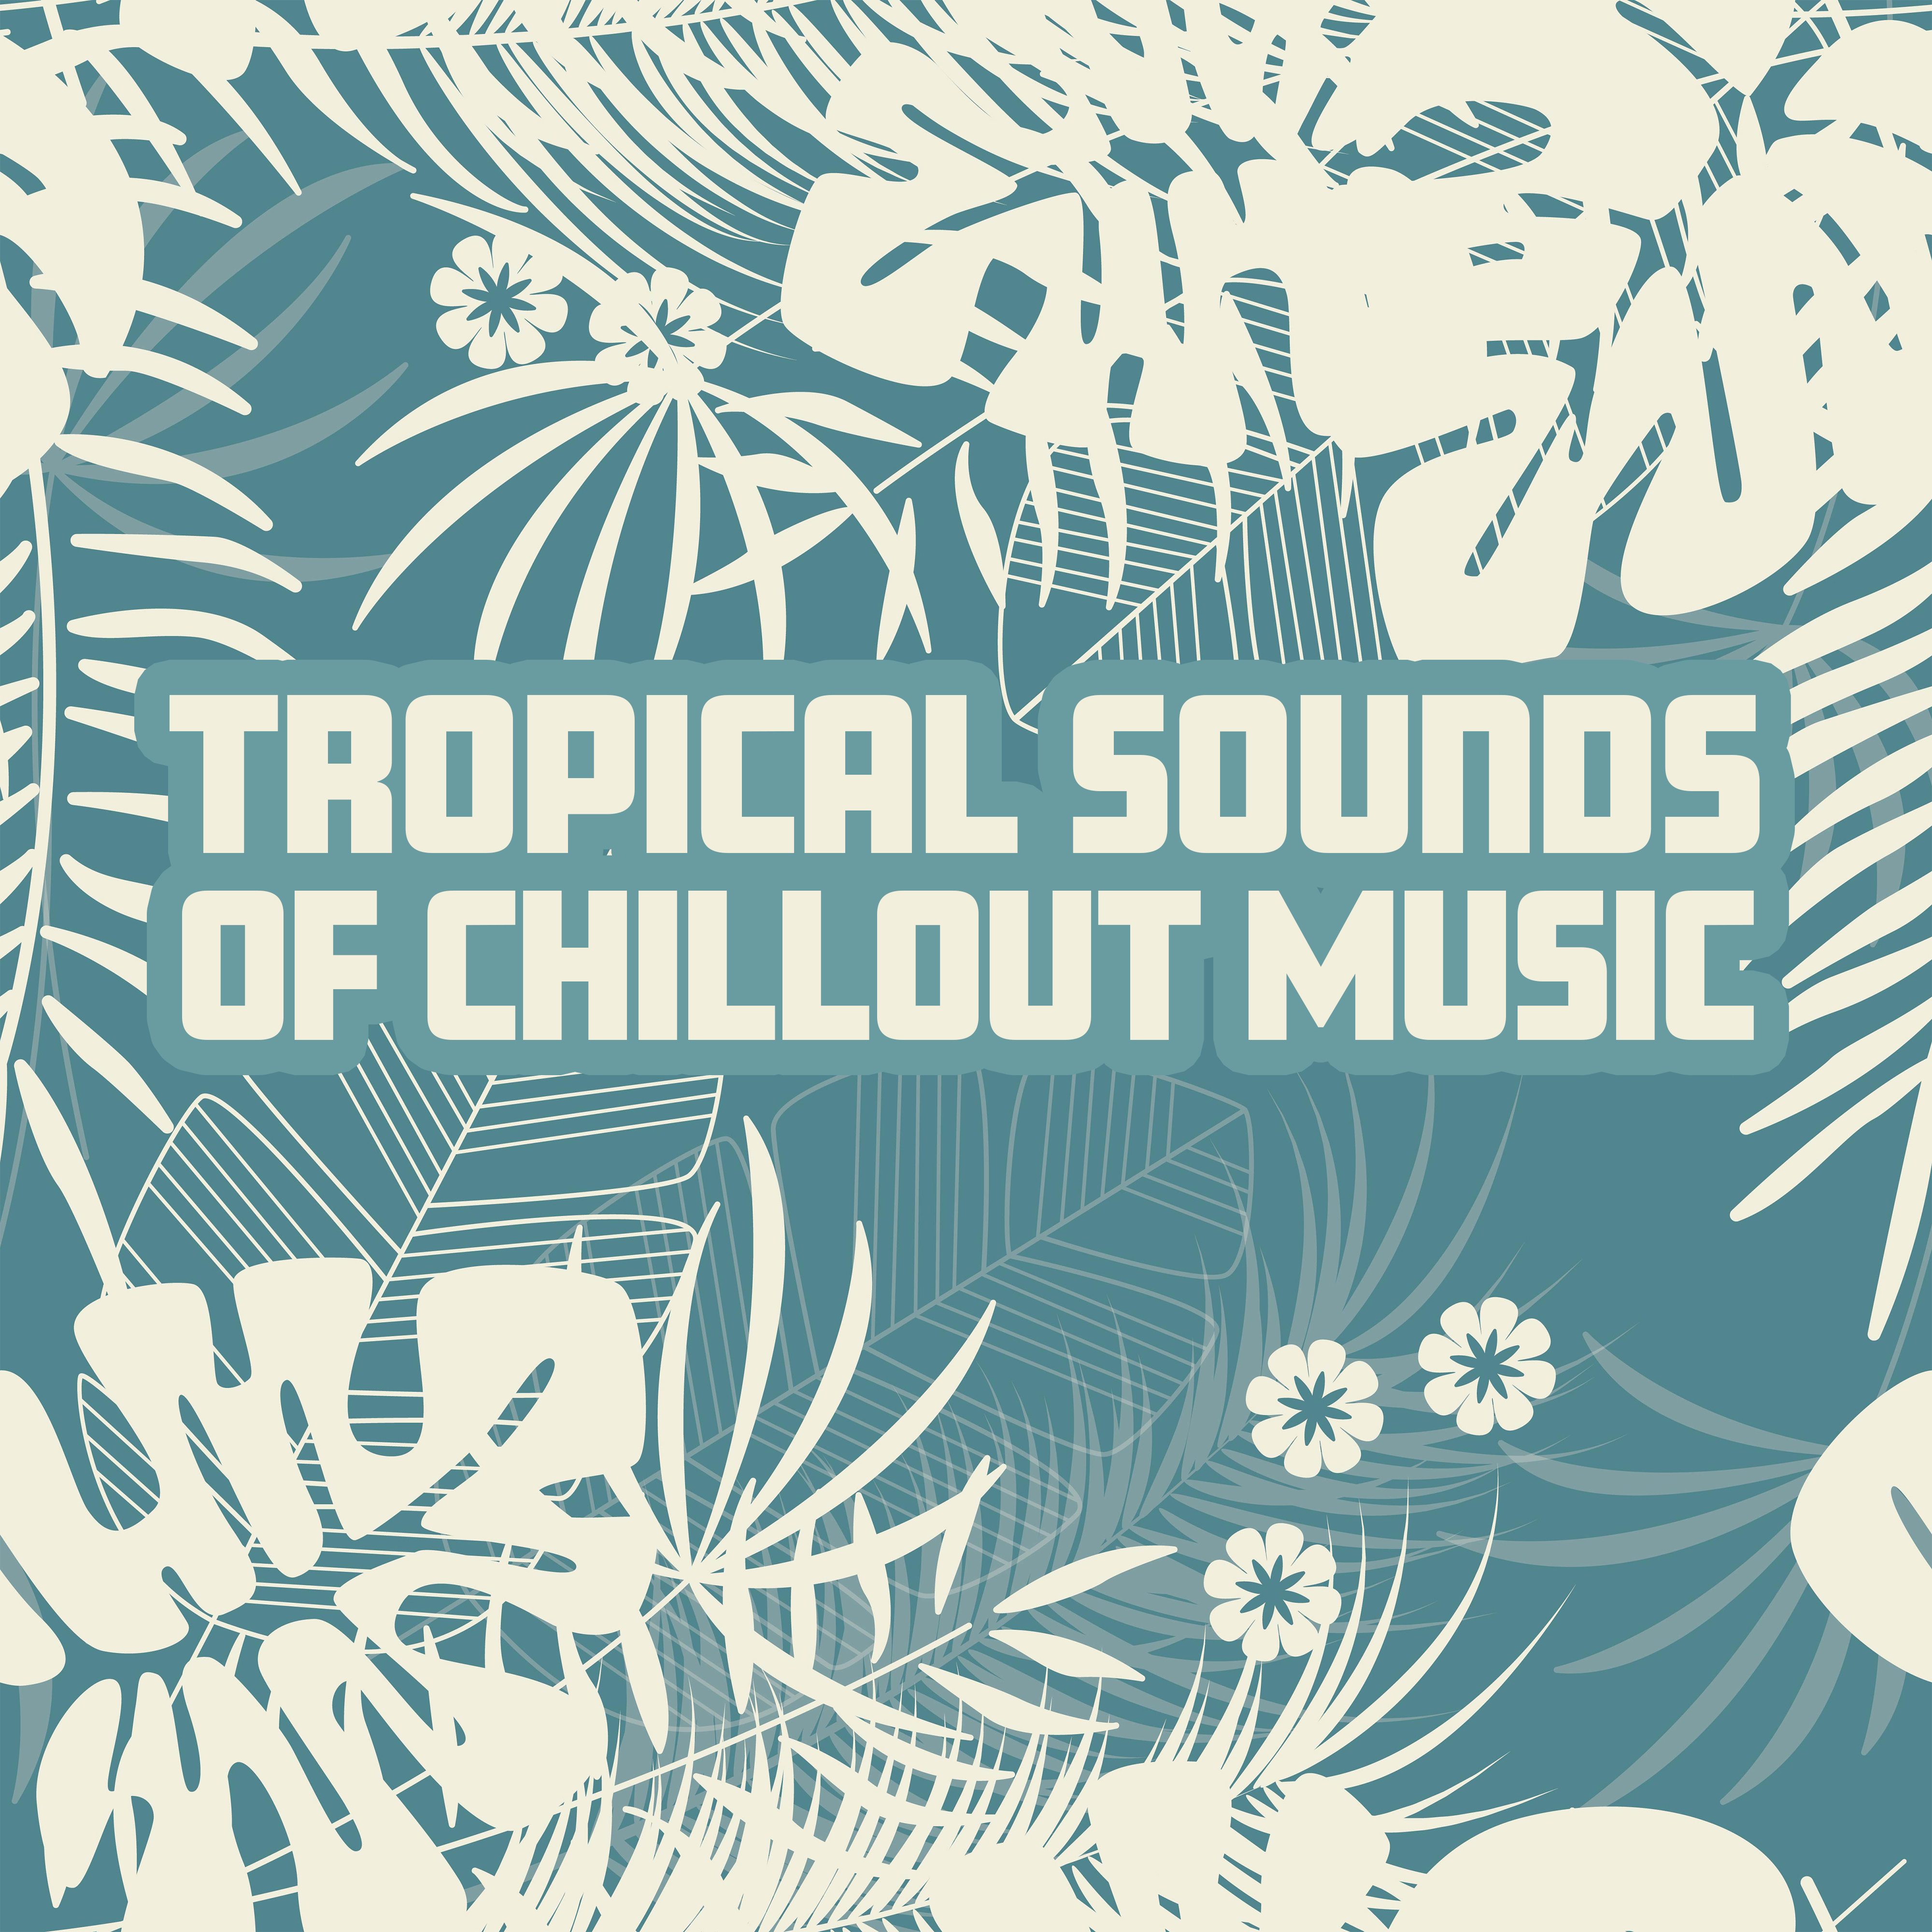 Tropical Sounds of Chillout Music – Hot Electronic Beats, Summer Vibes, **** Moves Songs